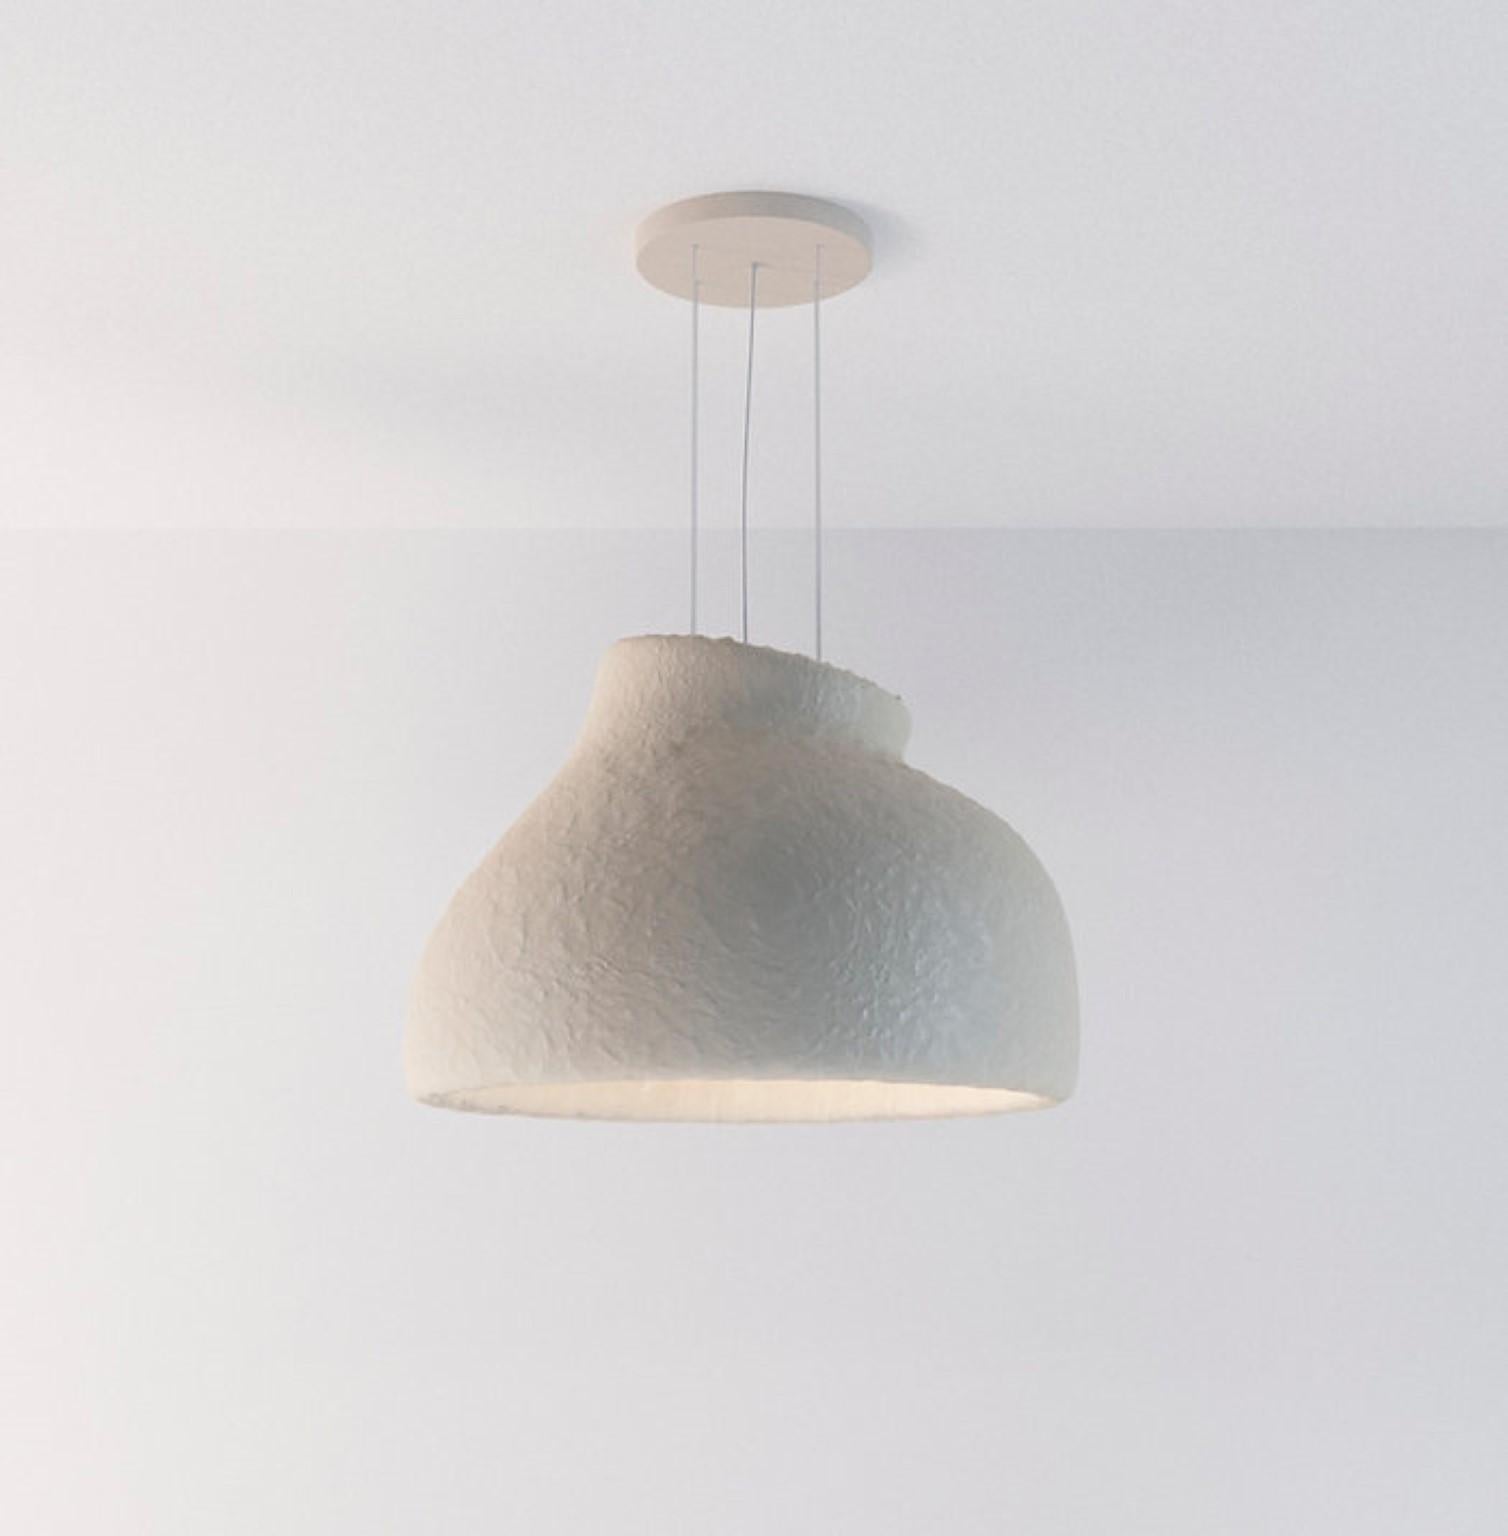 Medium pendant lamp by Faina
Design: Victoriya Yakusha
Materials: a blend of upcycled steel, flax rubber, wood chips, cellulose, and clay all with biopolymer cover.
Dimensions: D 80 x H 56 cm
Available in 12 colors. 

SONIAH tends toward the